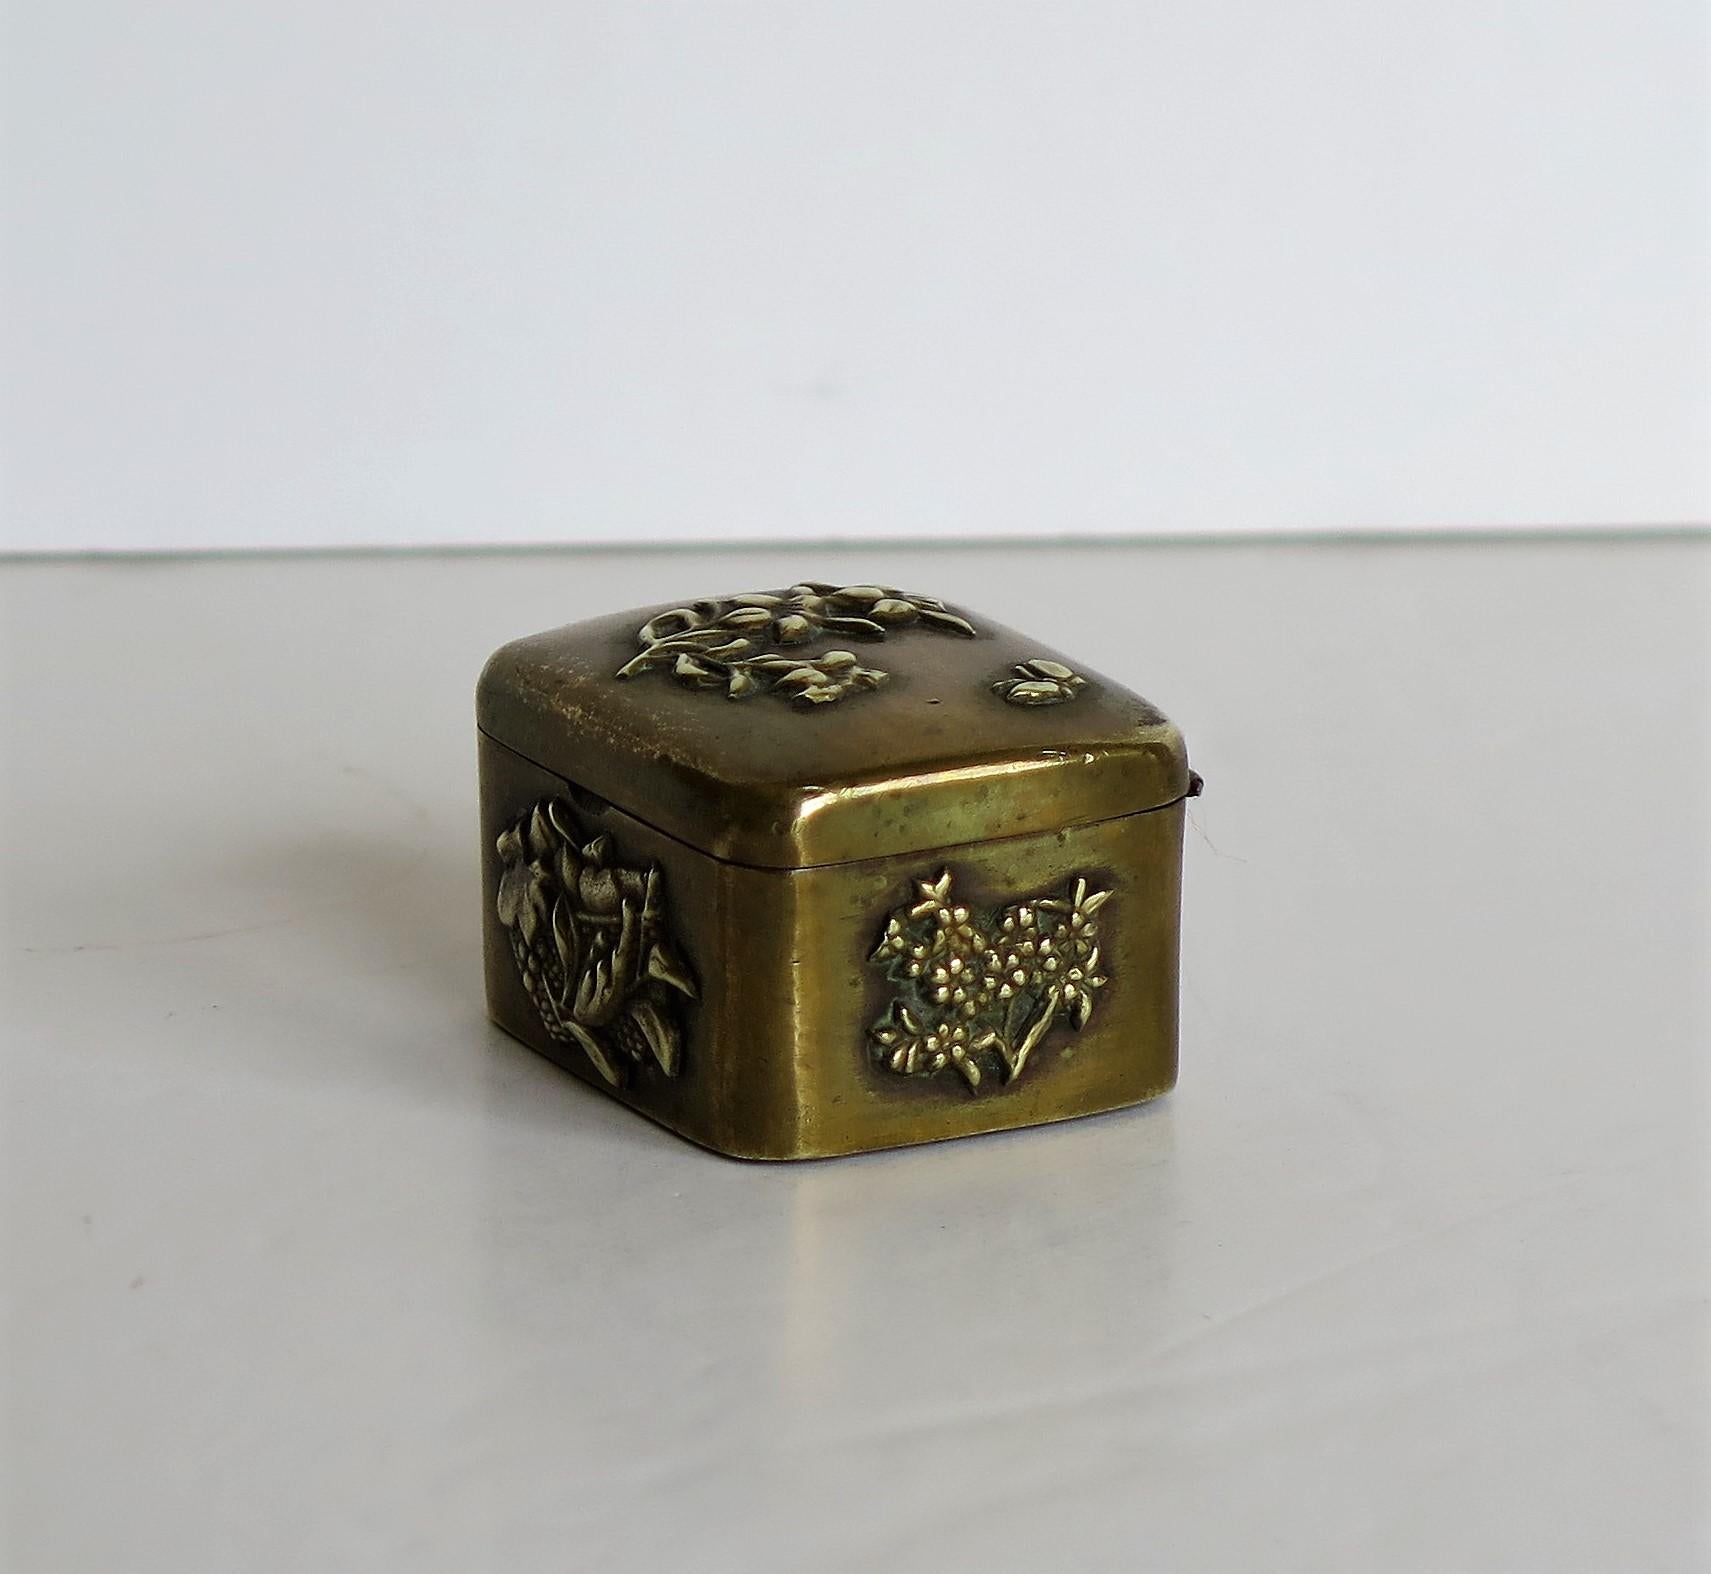 This is a small Japanese bronze and brass box with a hinged lid and different detailed embossed applied patterns of flowers and leaves, dating to the 19th century Meiji period.

The box has a rectangular shape with a hinged slightly domed top